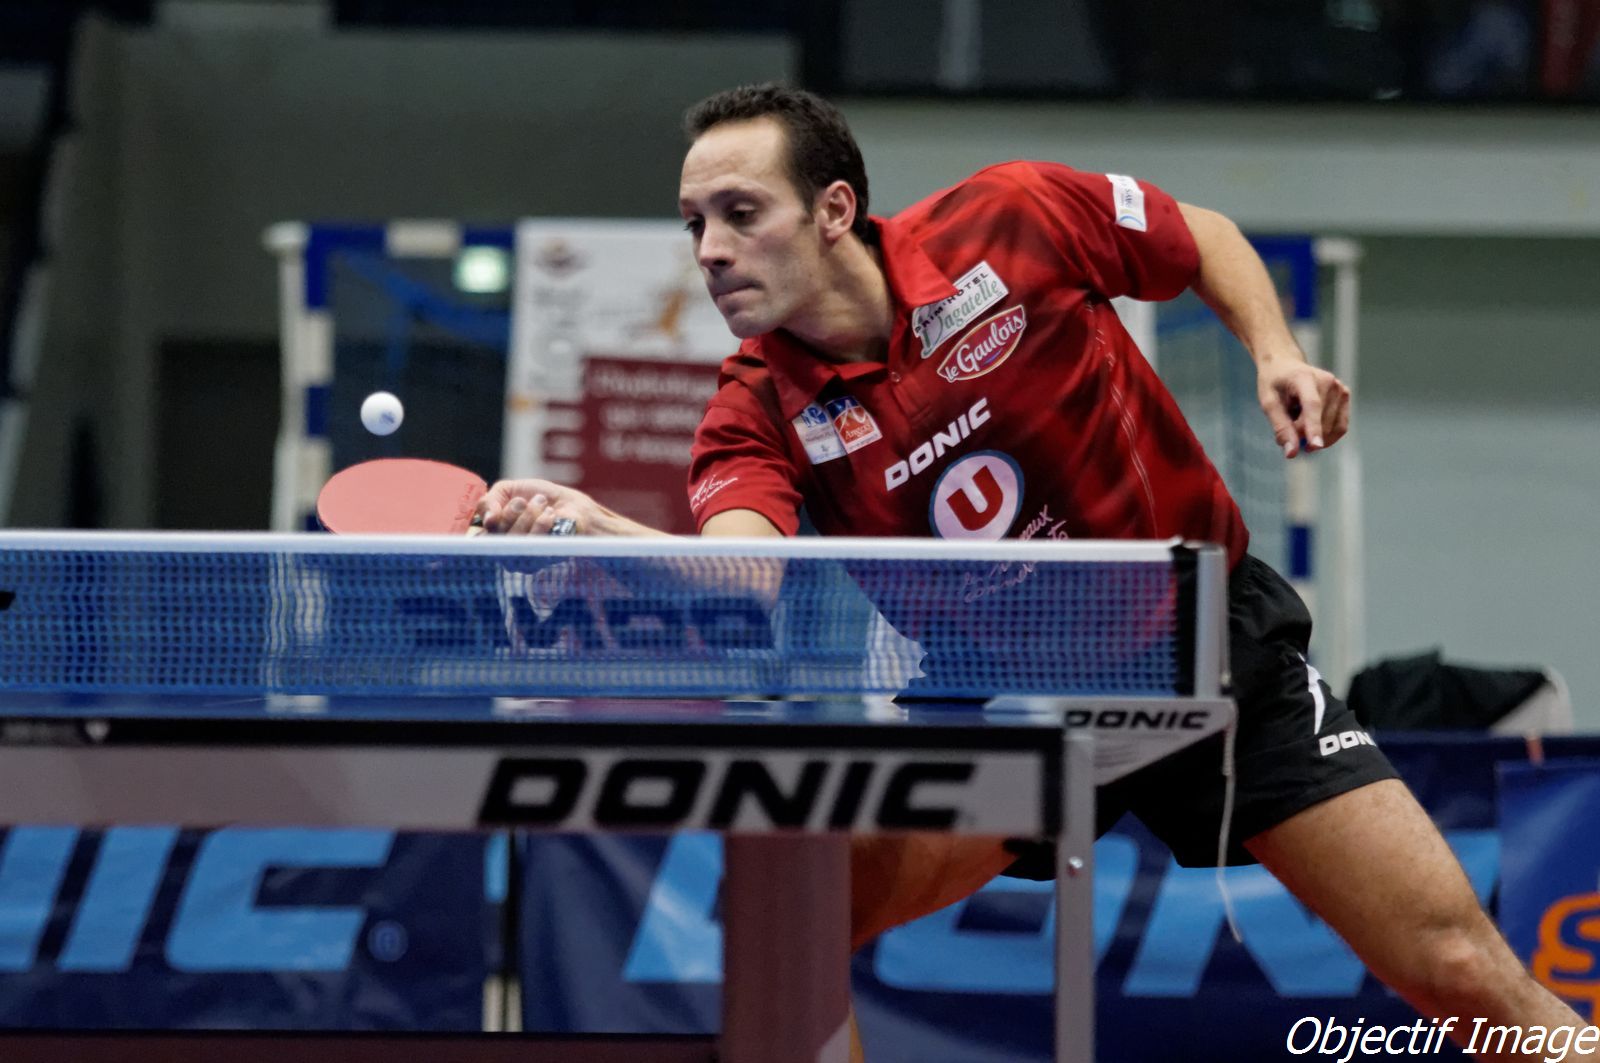 an image of a man that is playing table tennis